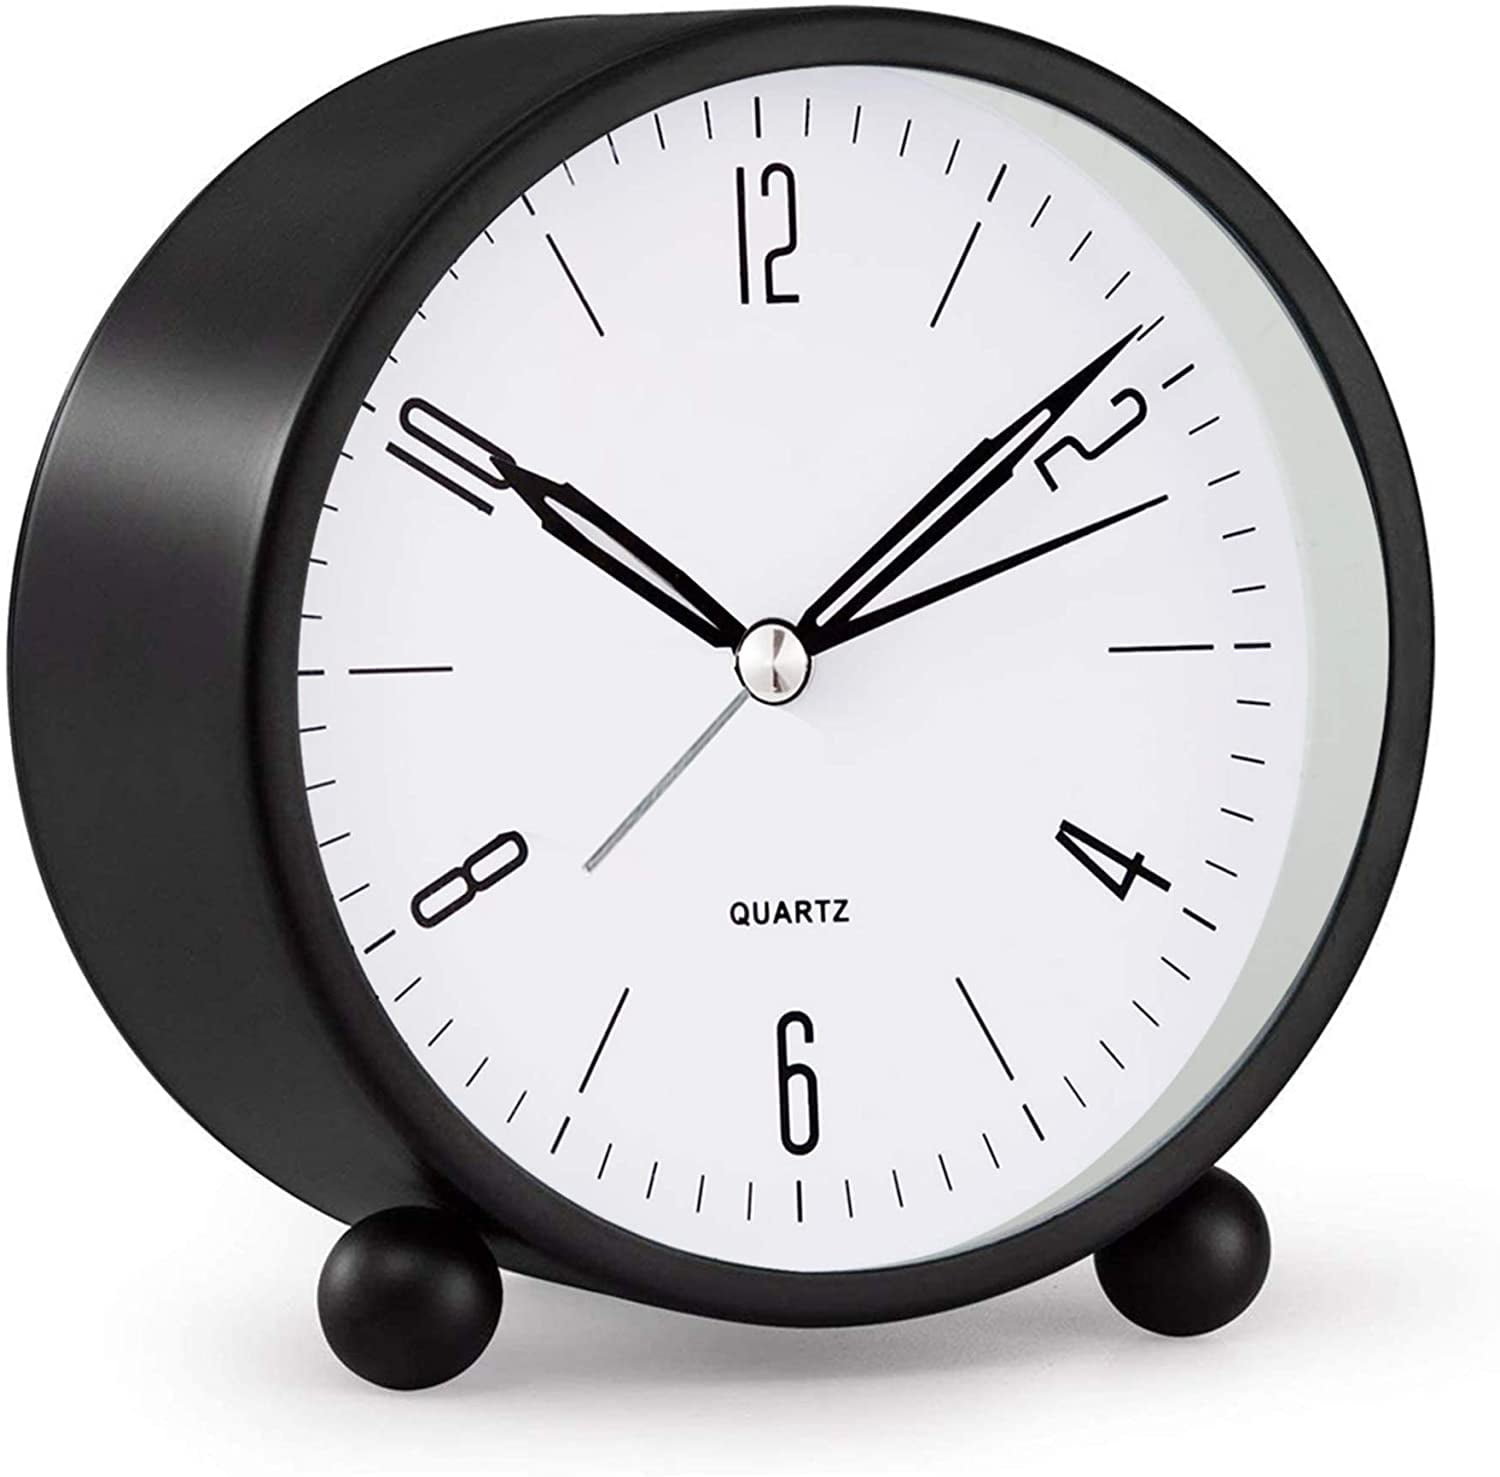 Silent Brushed Stainless Steel Bedside Alarm Clock • Quiet no Tick • Black face 